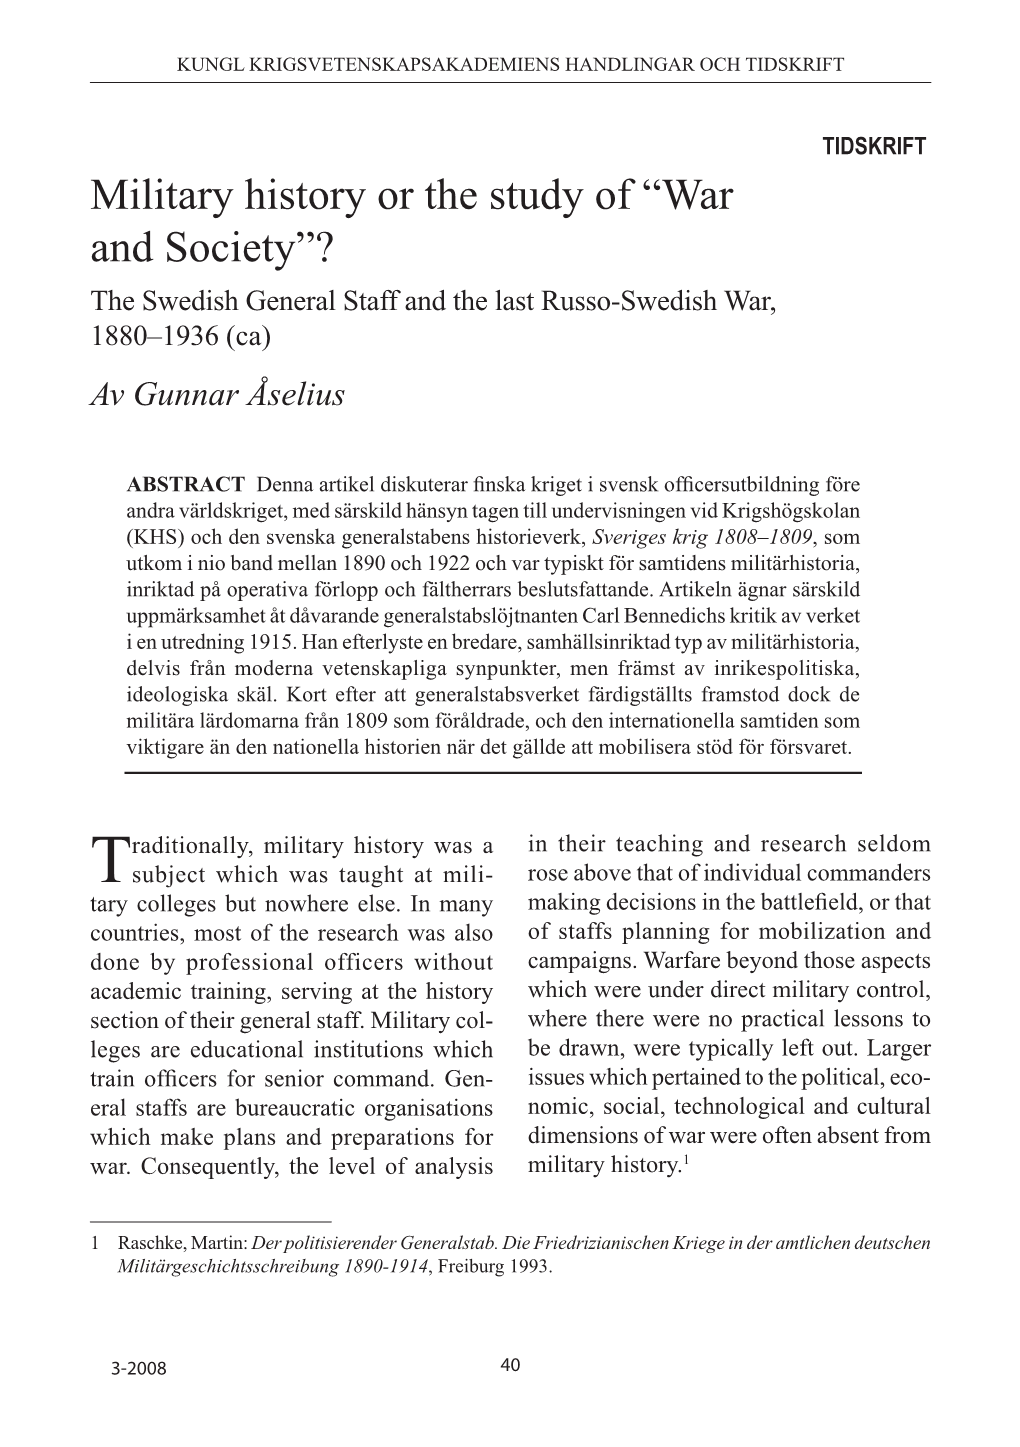 Military History Or the Study of “War and Society”? the Swedish General Staff and the Last Russo-Swedish War, 1880–1936 (Ca)